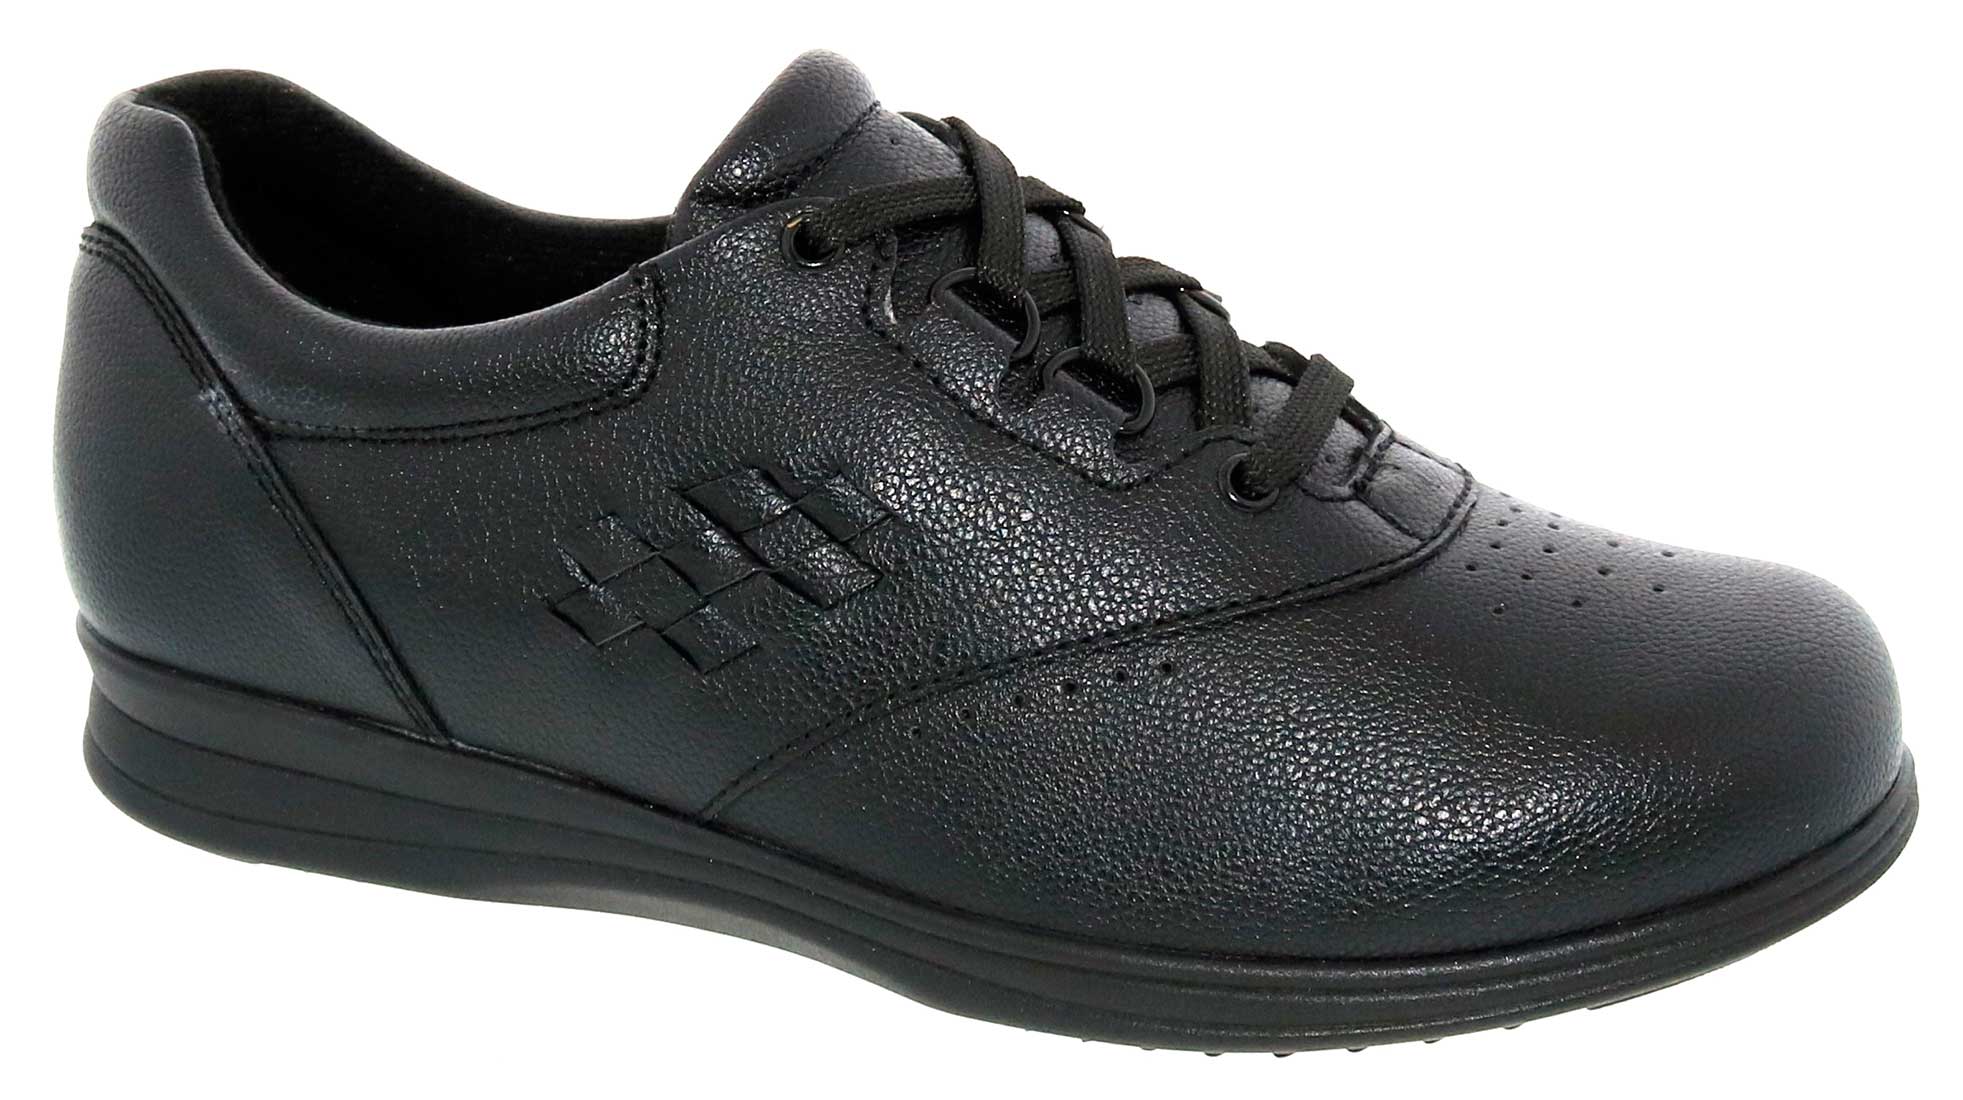 Footsaver Shoes Ticker 80295 - Women's Casual Comfort Therapeutic Diabetic Shoe - Extra Depth For Orthotics